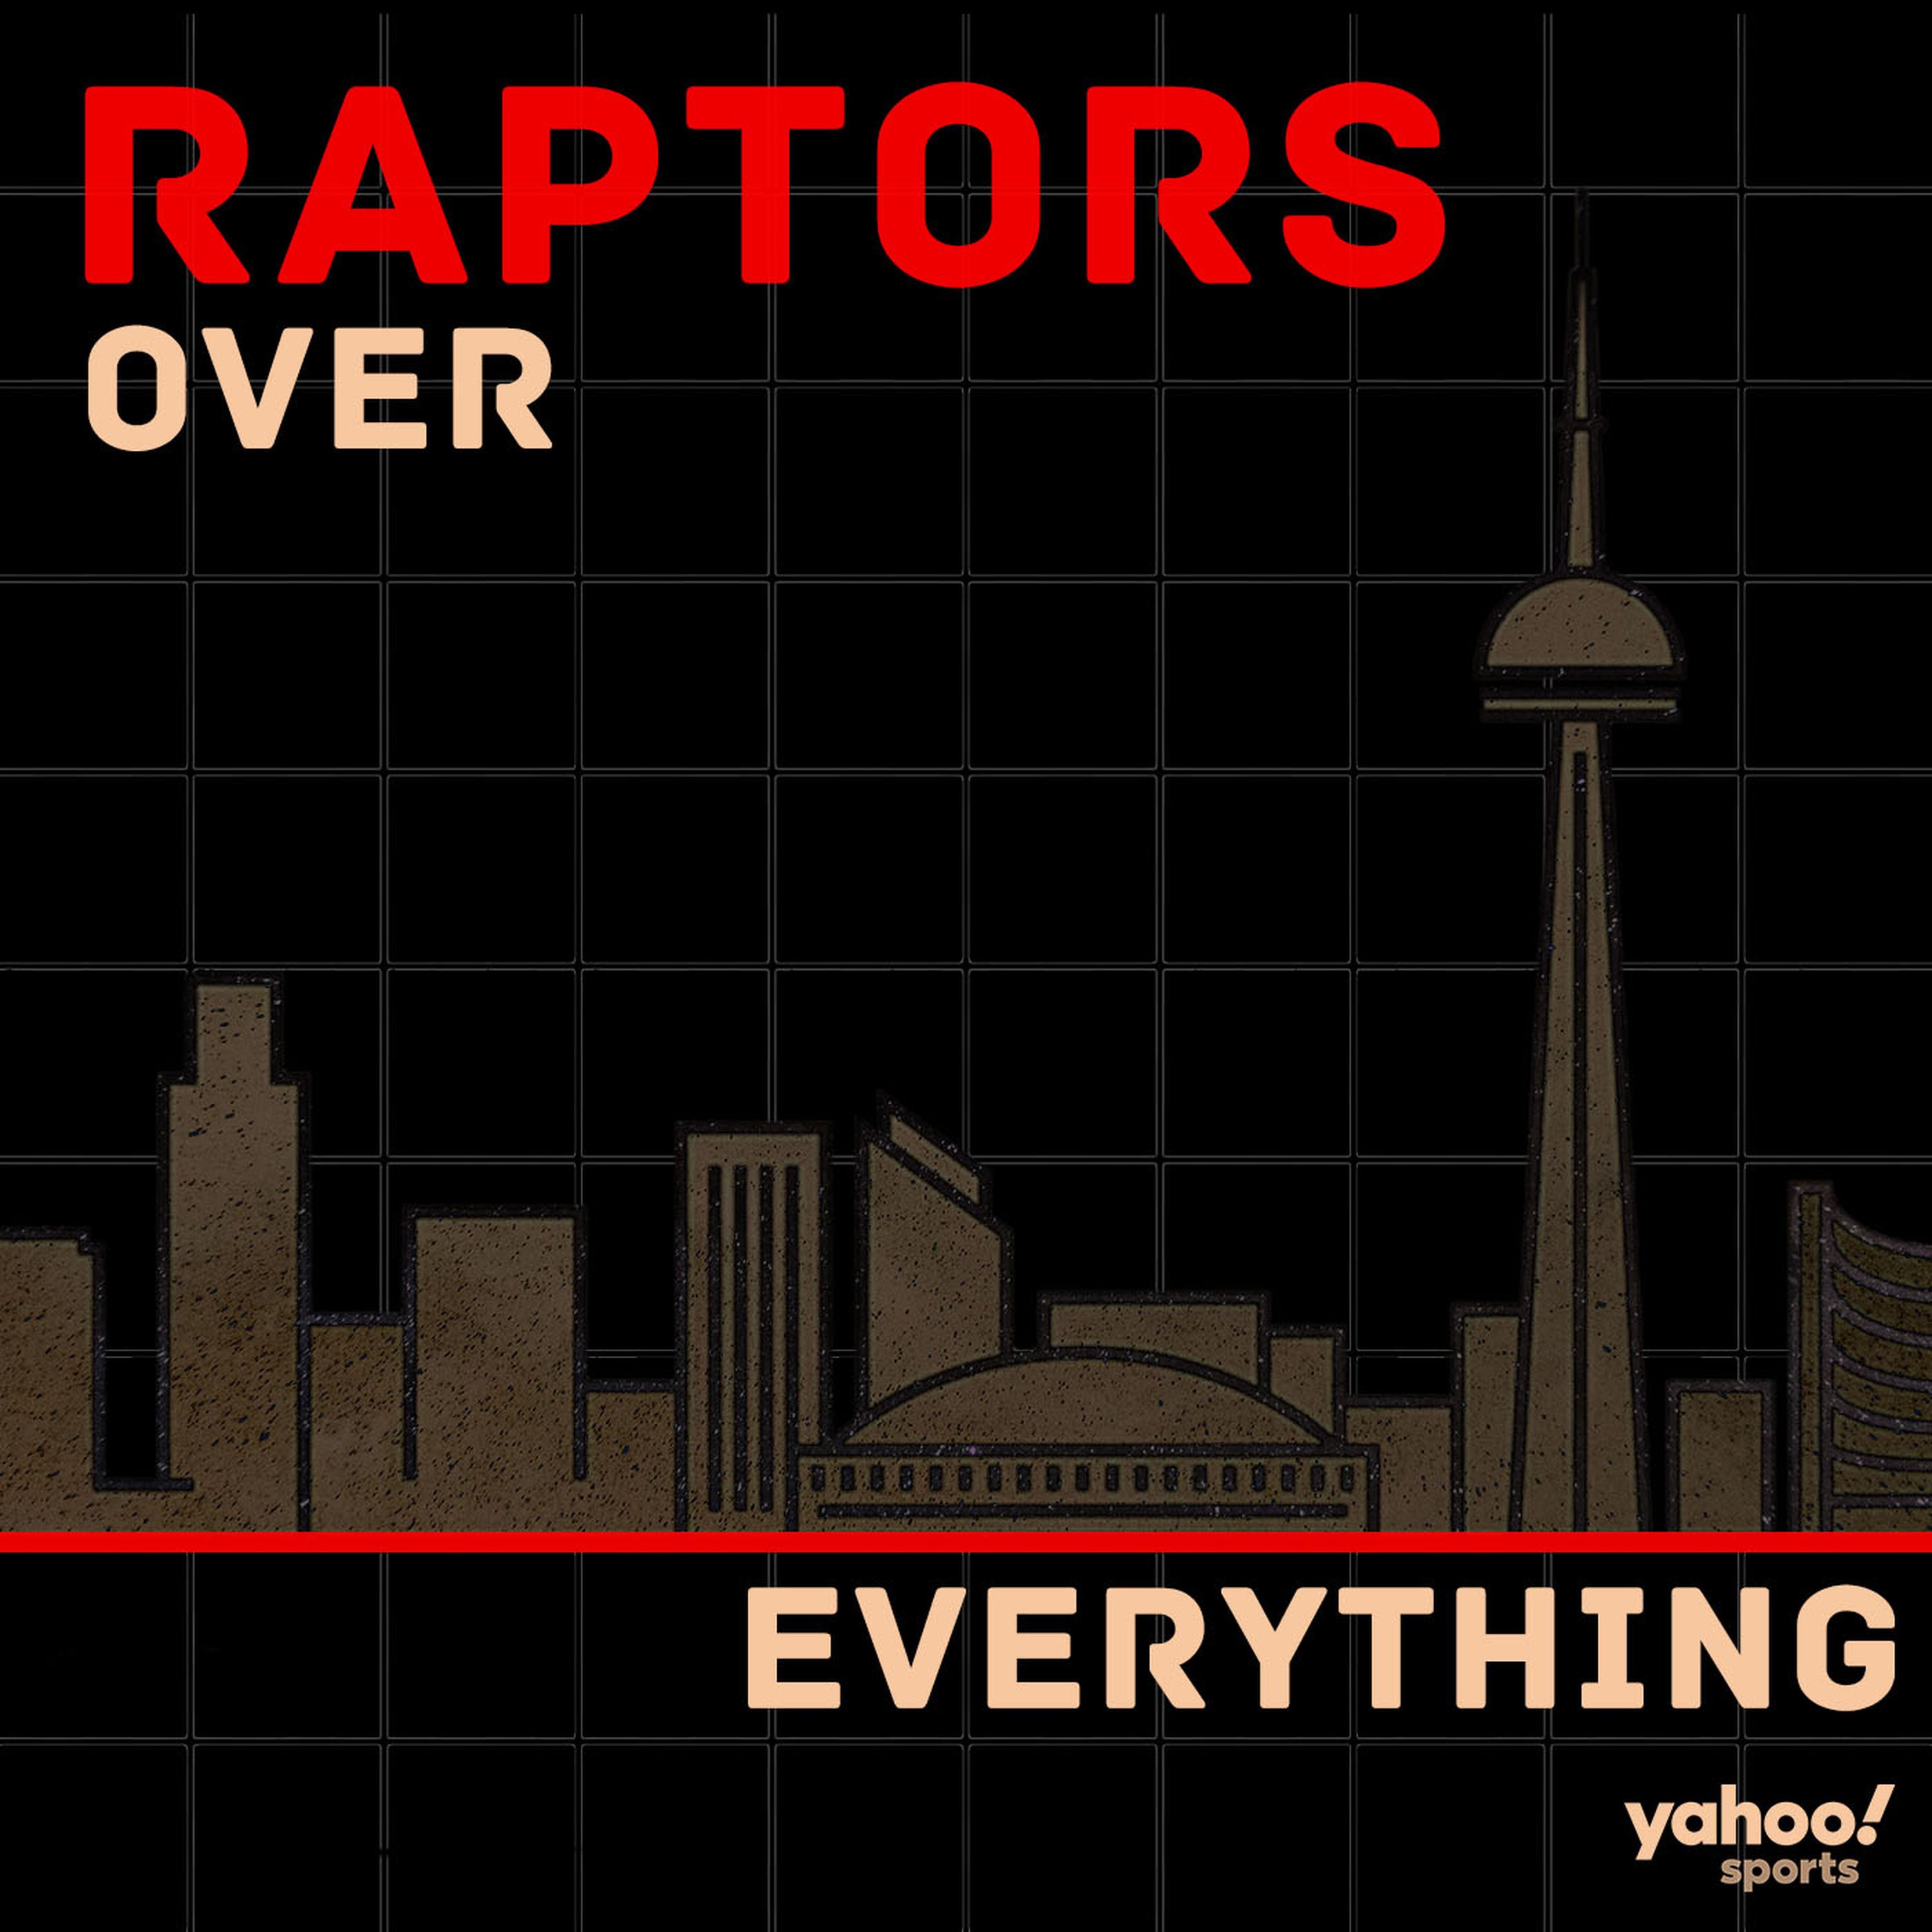 Raptors rip out the Nets’ heart in dominant Game 3 beatdown